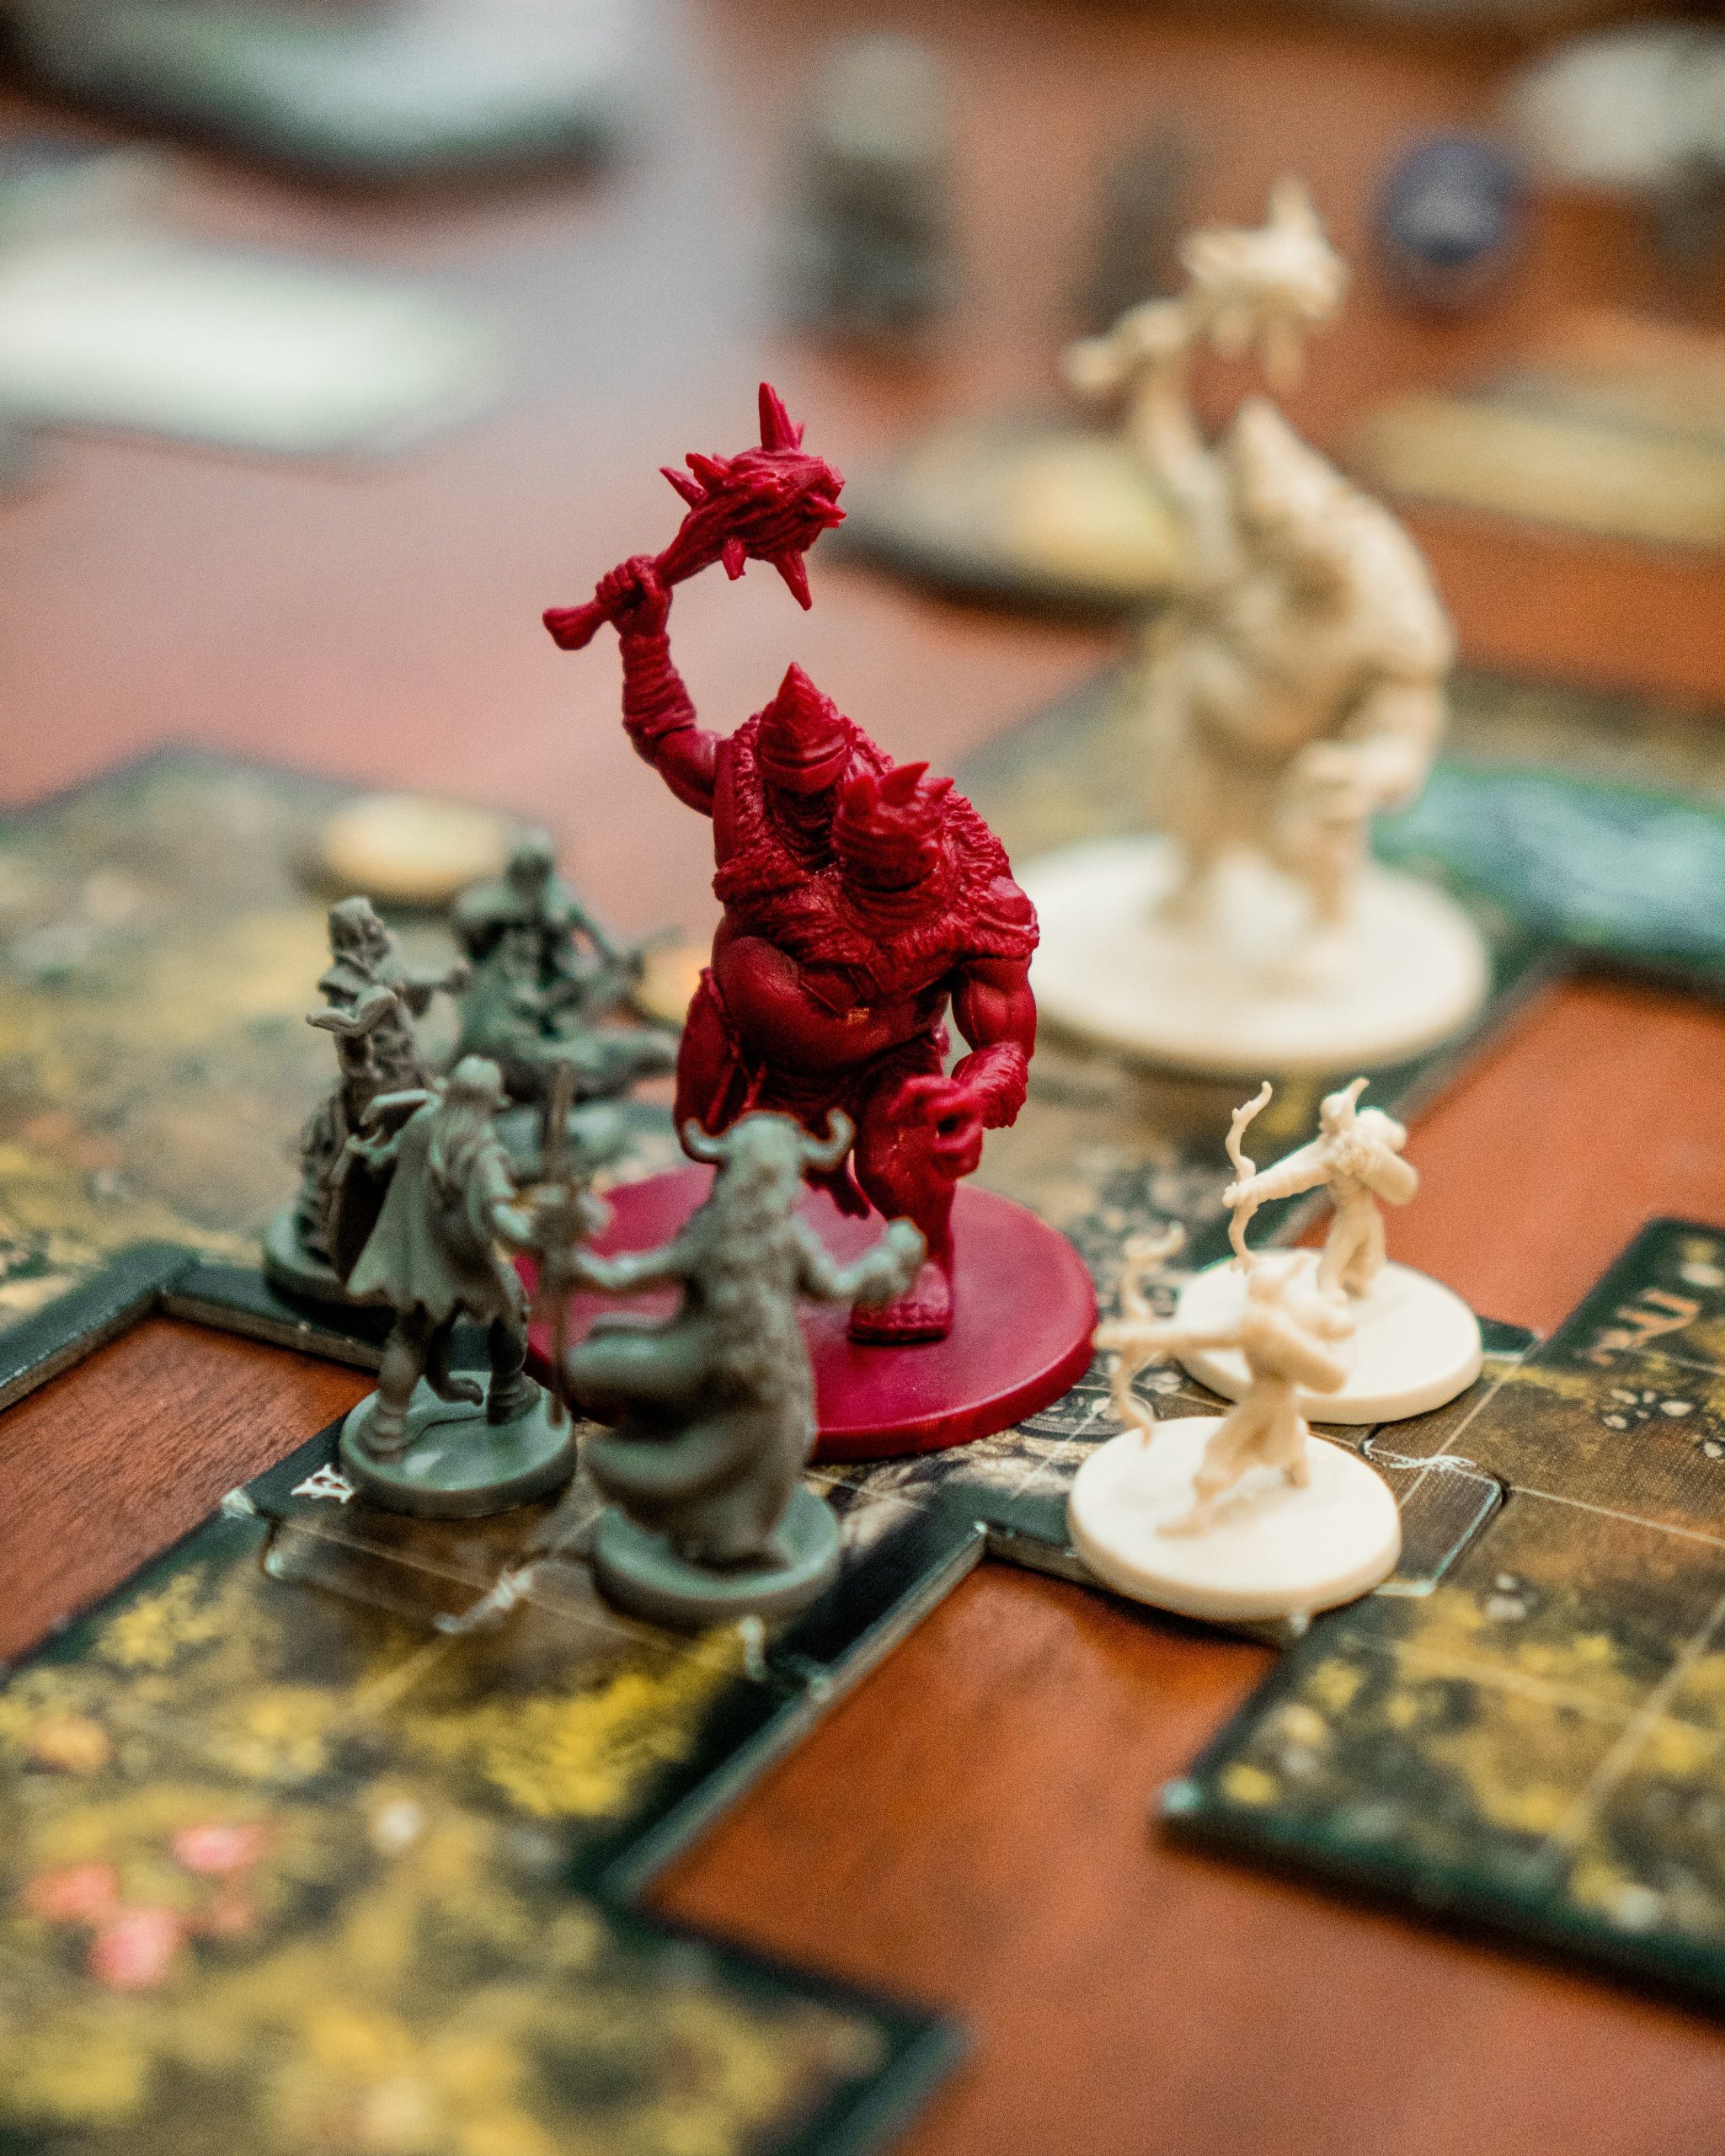 A large red monster figurine has a weapon raised above his head. The monster is surrounded by 7 small figurines with bows, spears, and swords. The figurines are placed on map tiles which describe and map out the environment.